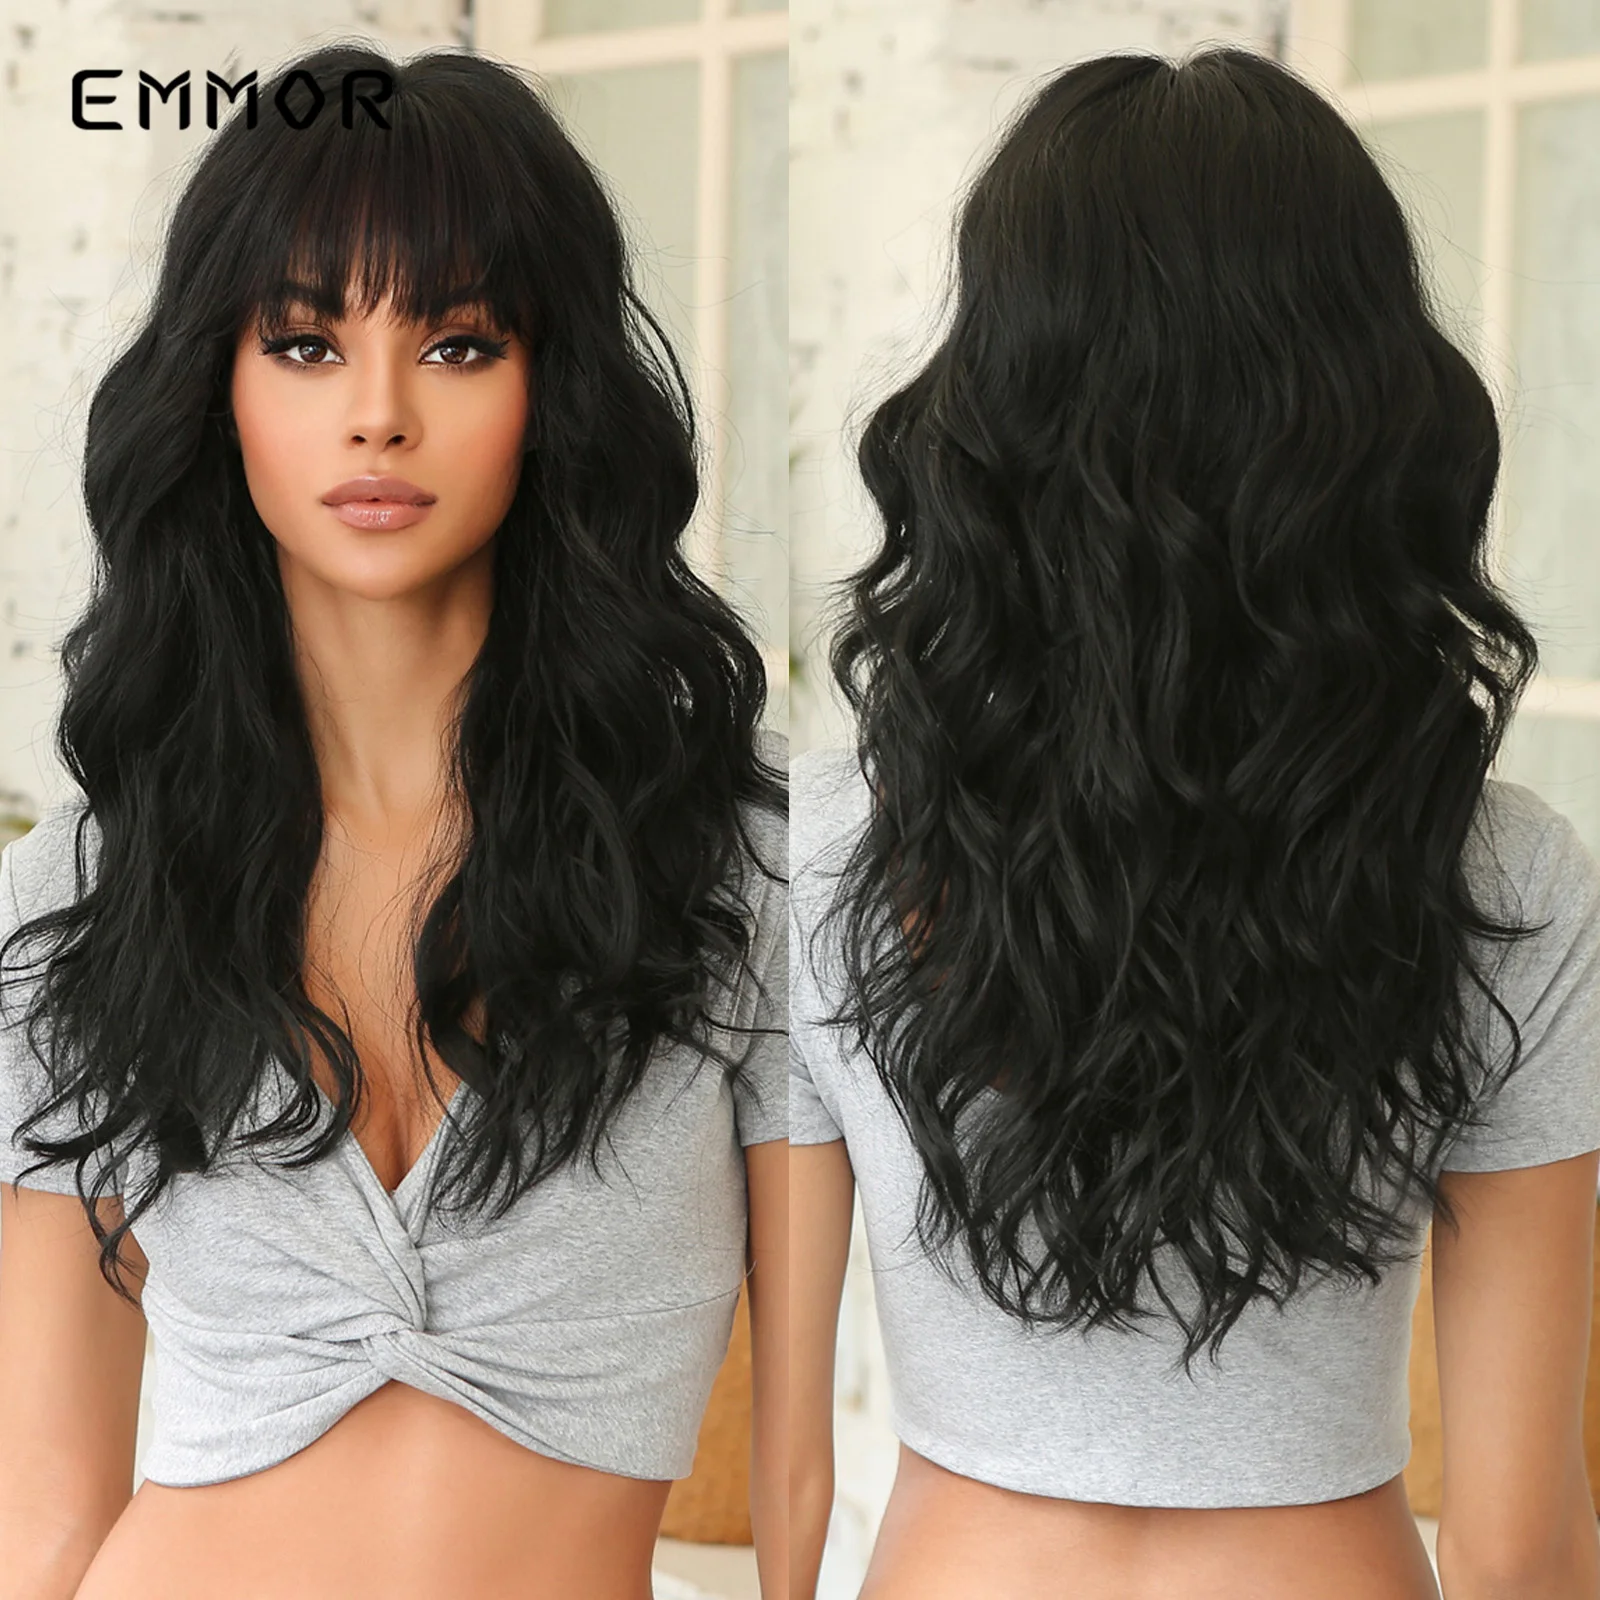 Emmor Black Long Wave Wigs with Bangs for Women High Quality Synthetic Wig - £23.19 GBP